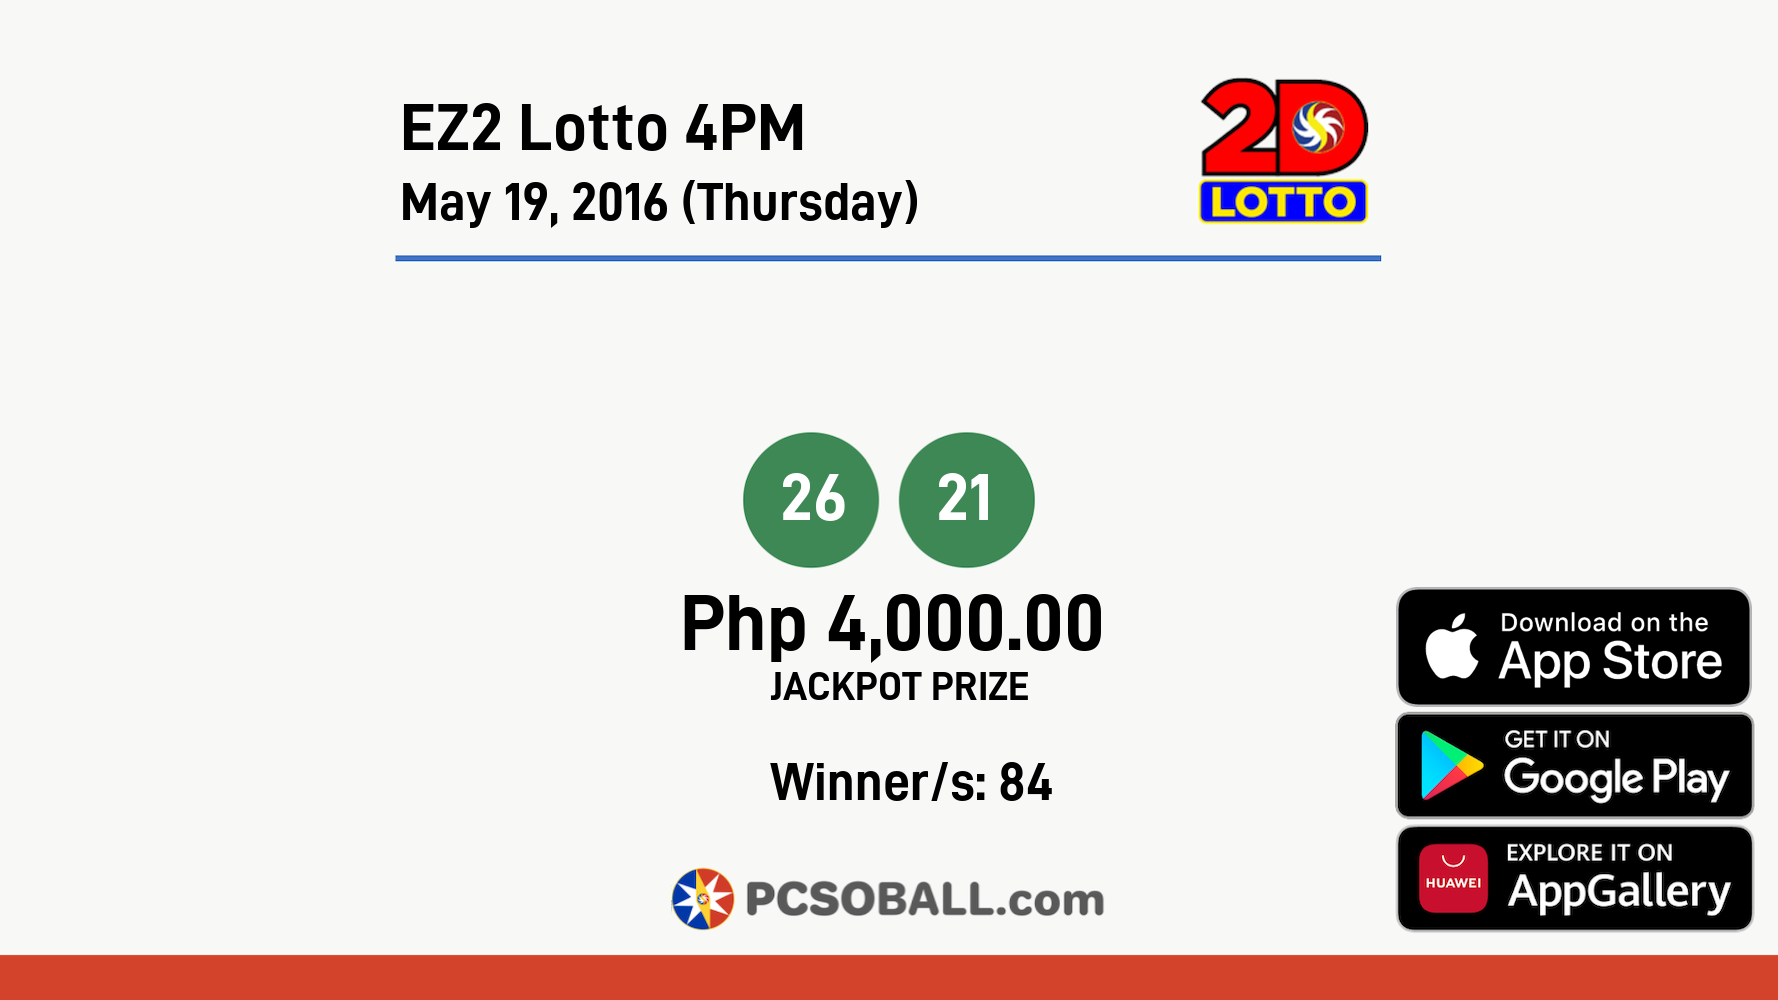 EZ2 Lotto 4PM May 19, 2016 (Thursday) Result